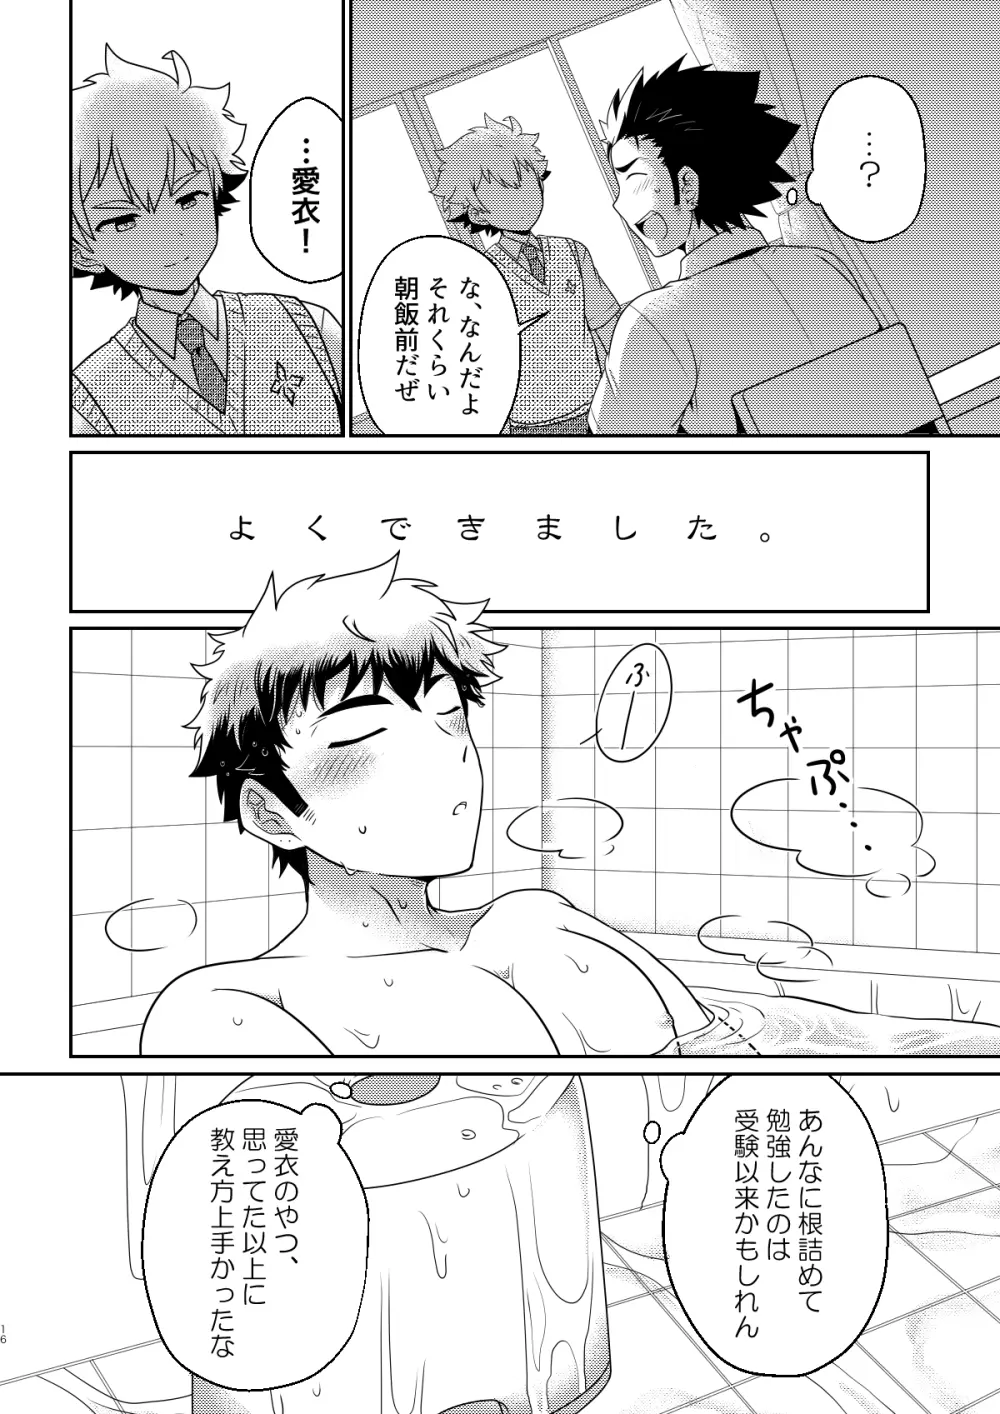 intoxication Page.15